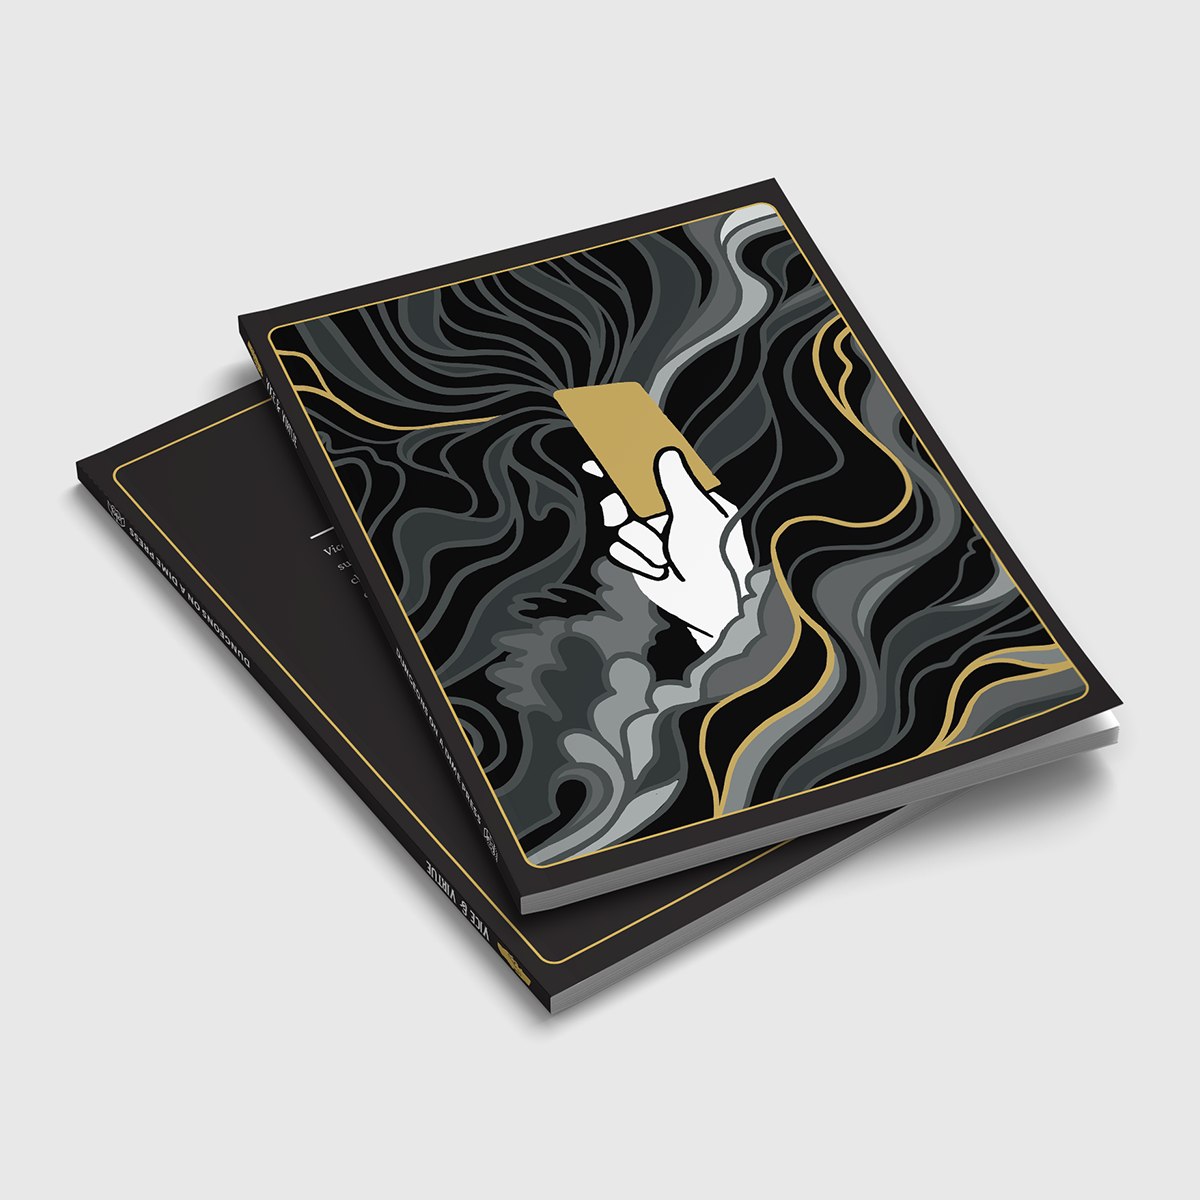 Image shows two copies of Vice & Virtue stacked on top of each other. The cover shoes a white hand raiding a golden card, and the hand it surrounded by curling shadowy mists. Amongst the mists are single strands of gold.